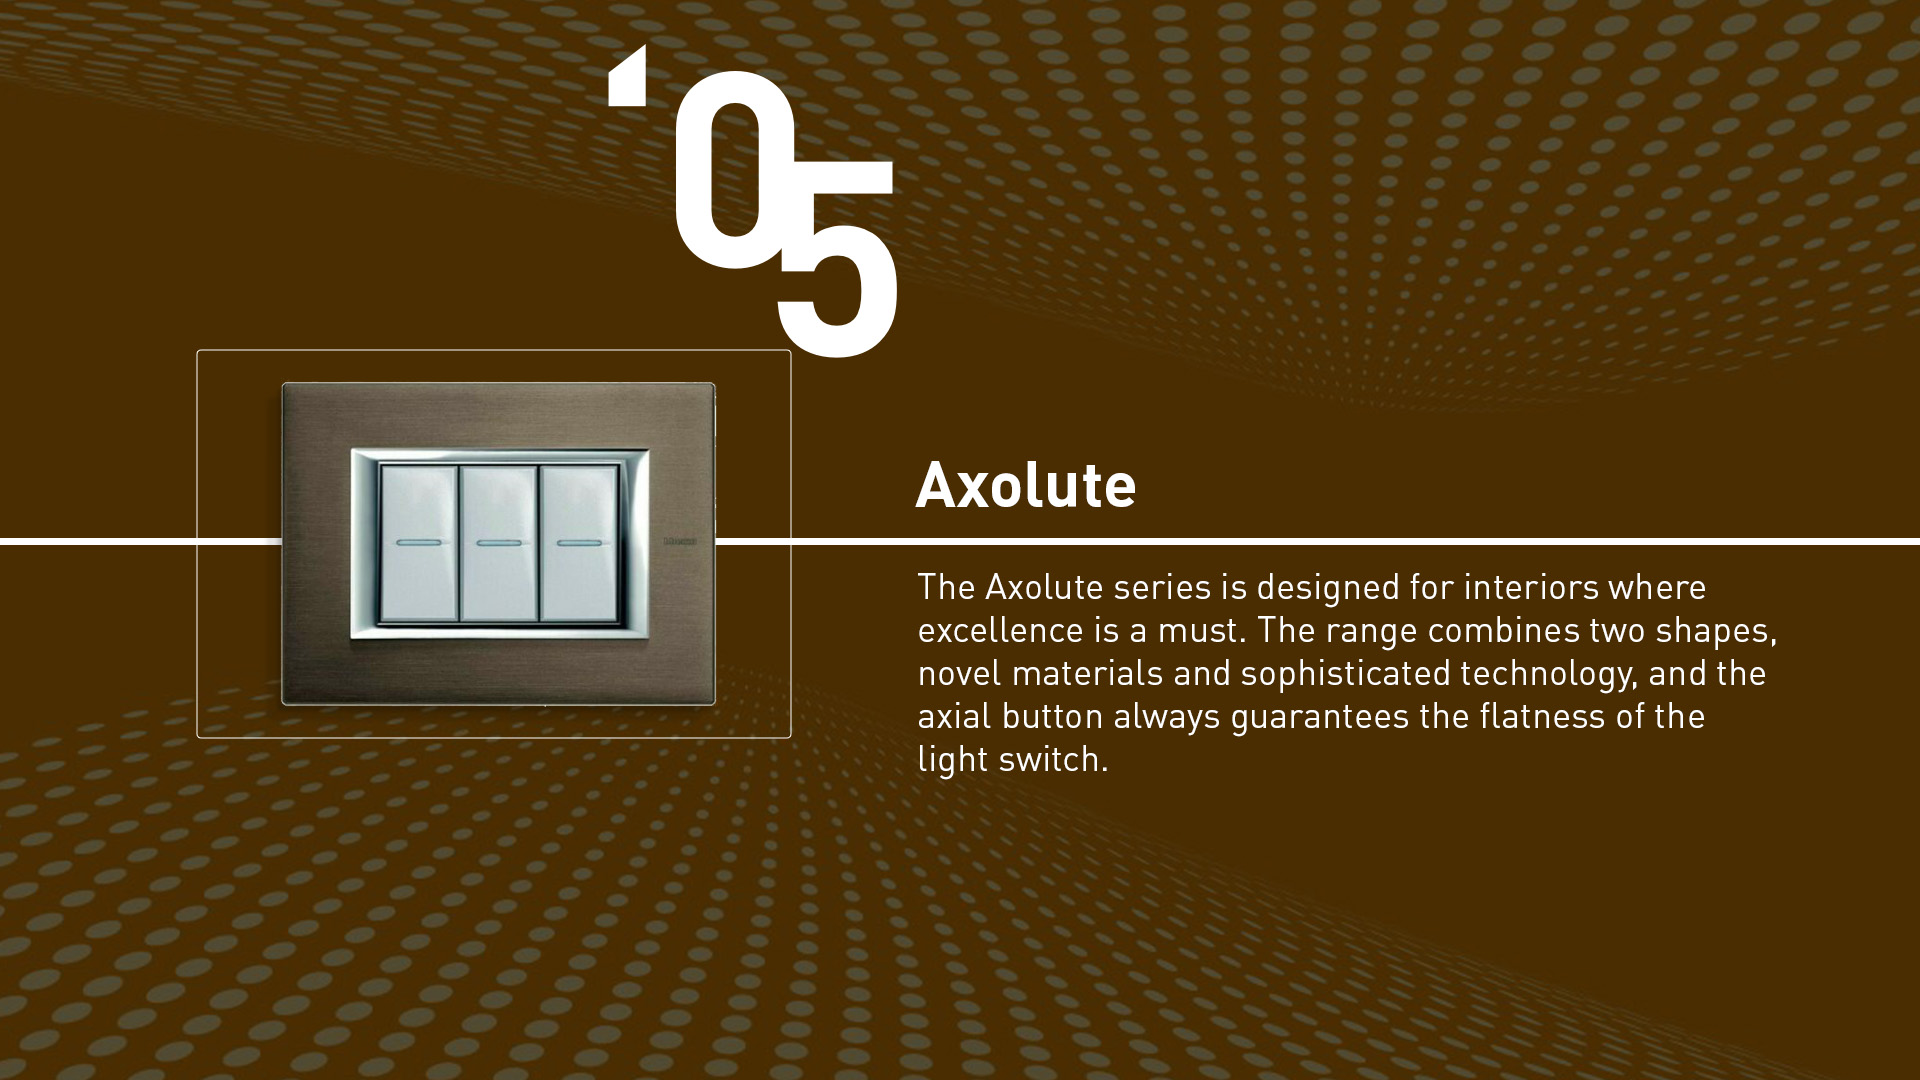 Axolute (2005). The range designed for interiors where excellence is a must that combines two shapes, novel materials, sophisticated technology, and the axial buttons.